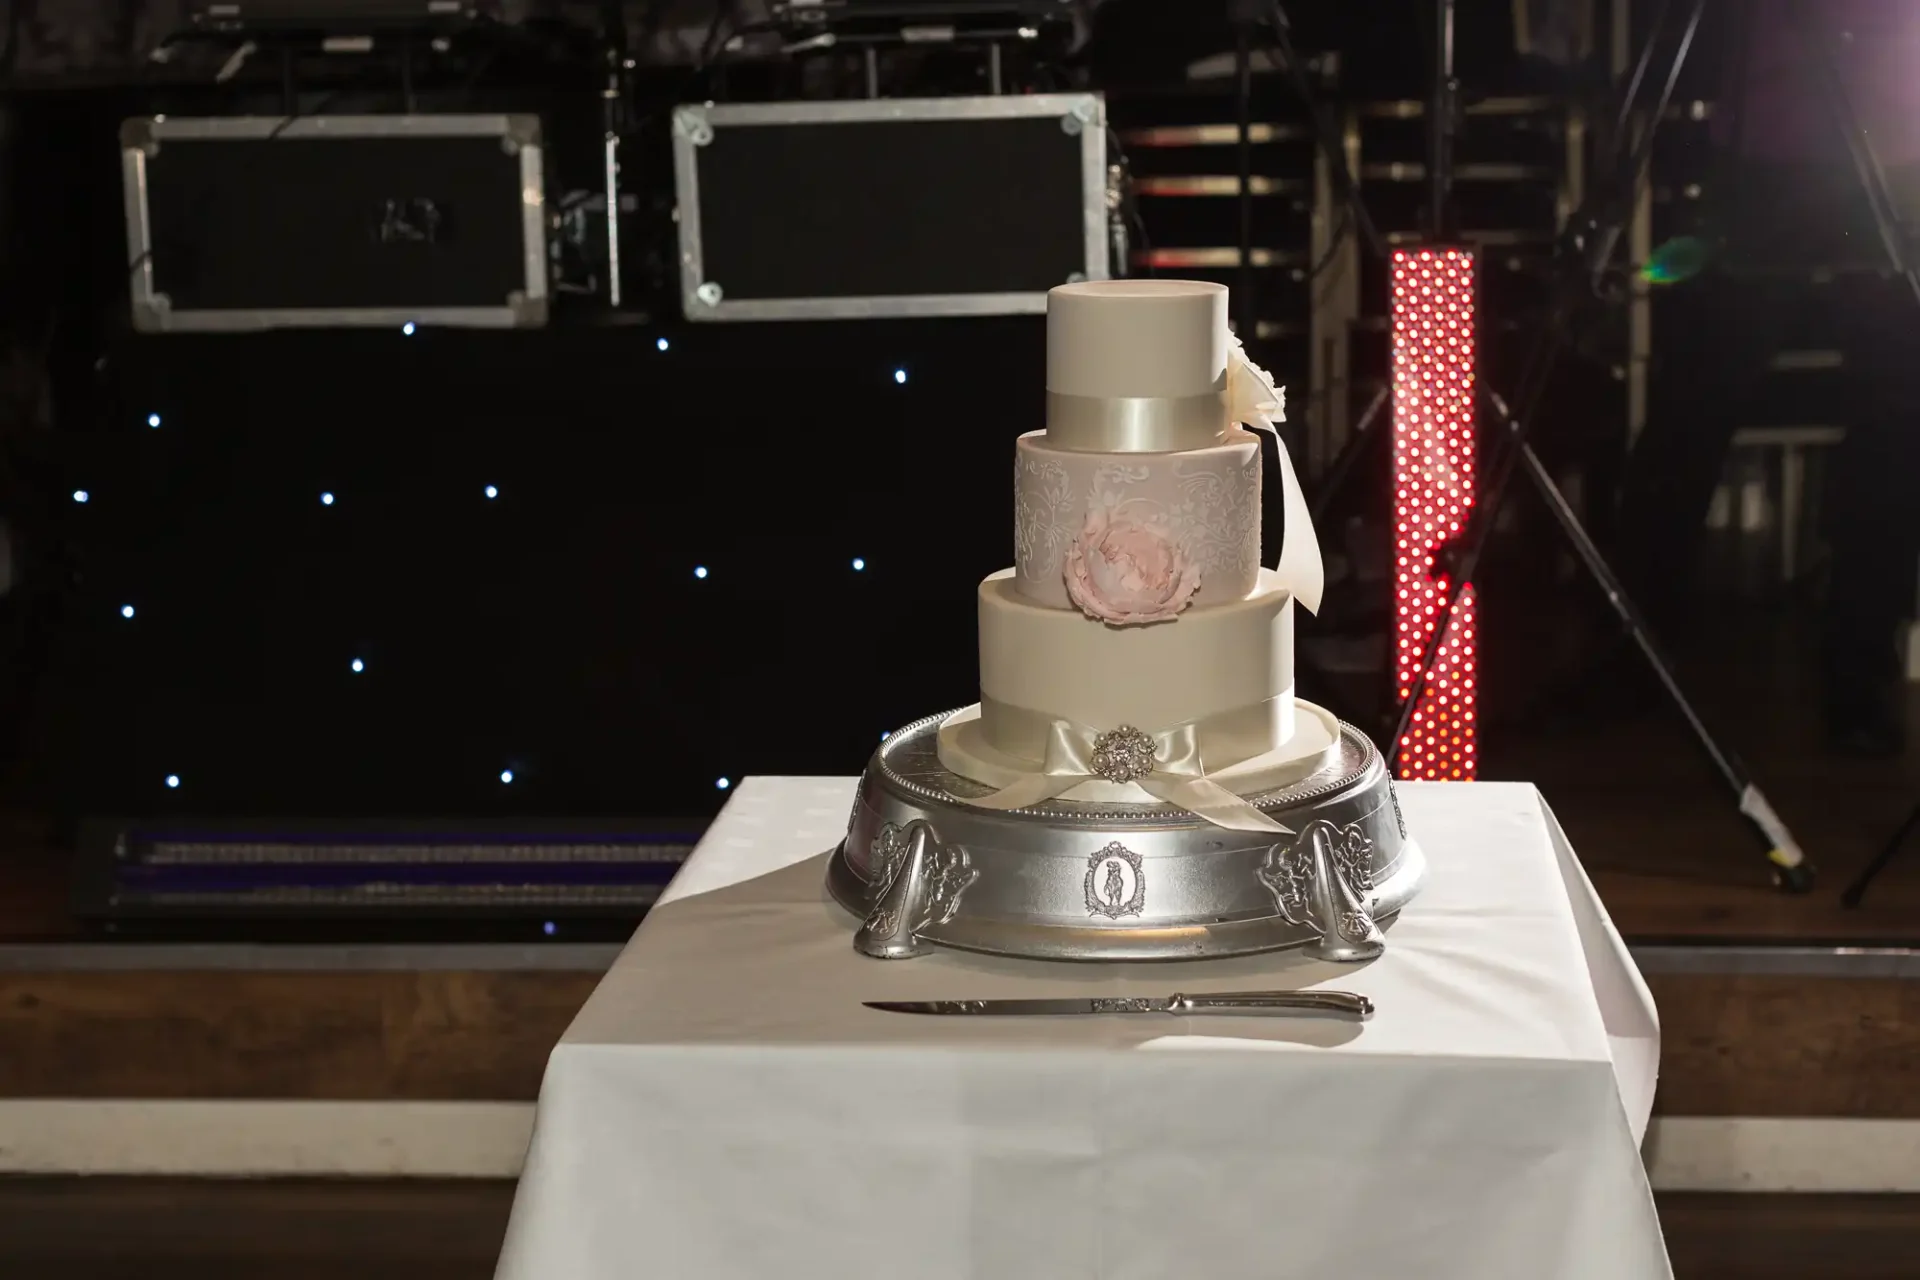 A three-tiered wedding cake on a silver stand, set against a dark backdrop with sparkling lights and stage equipment.